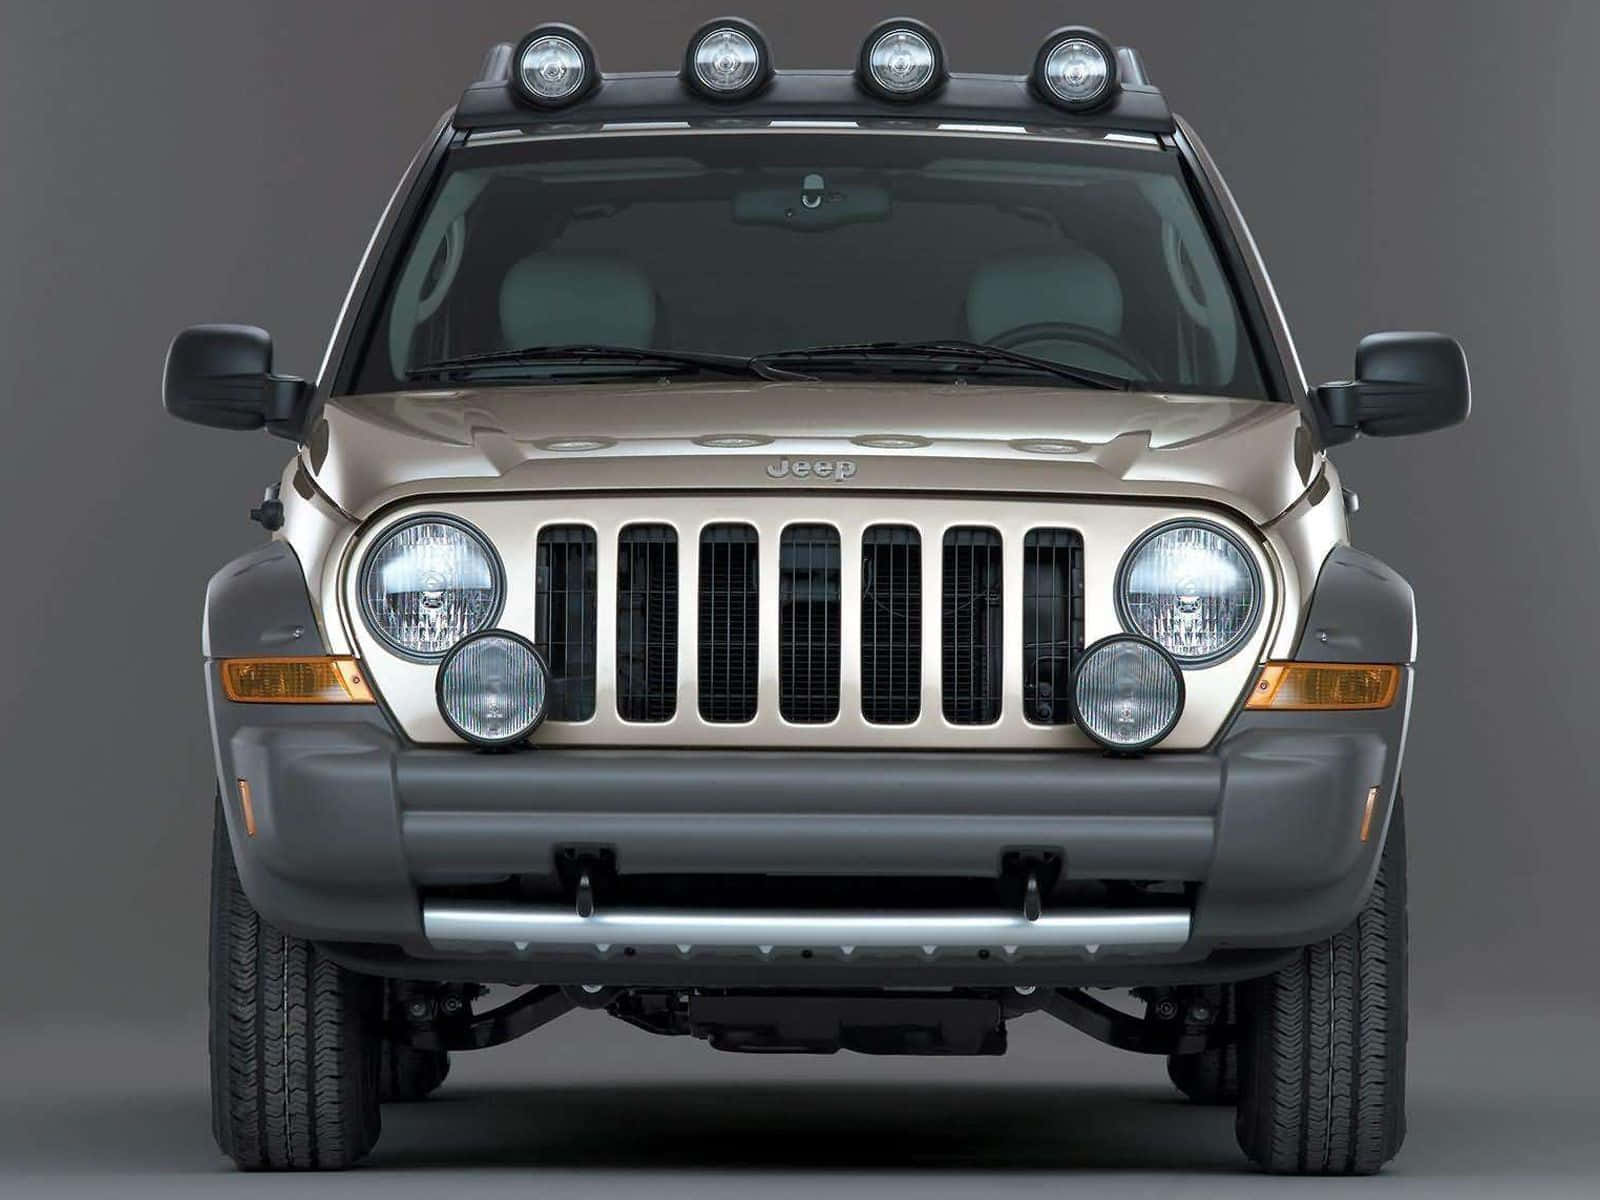 Caption: Jeep Liberty - The Perfect Off-Road SUV Wallpaper